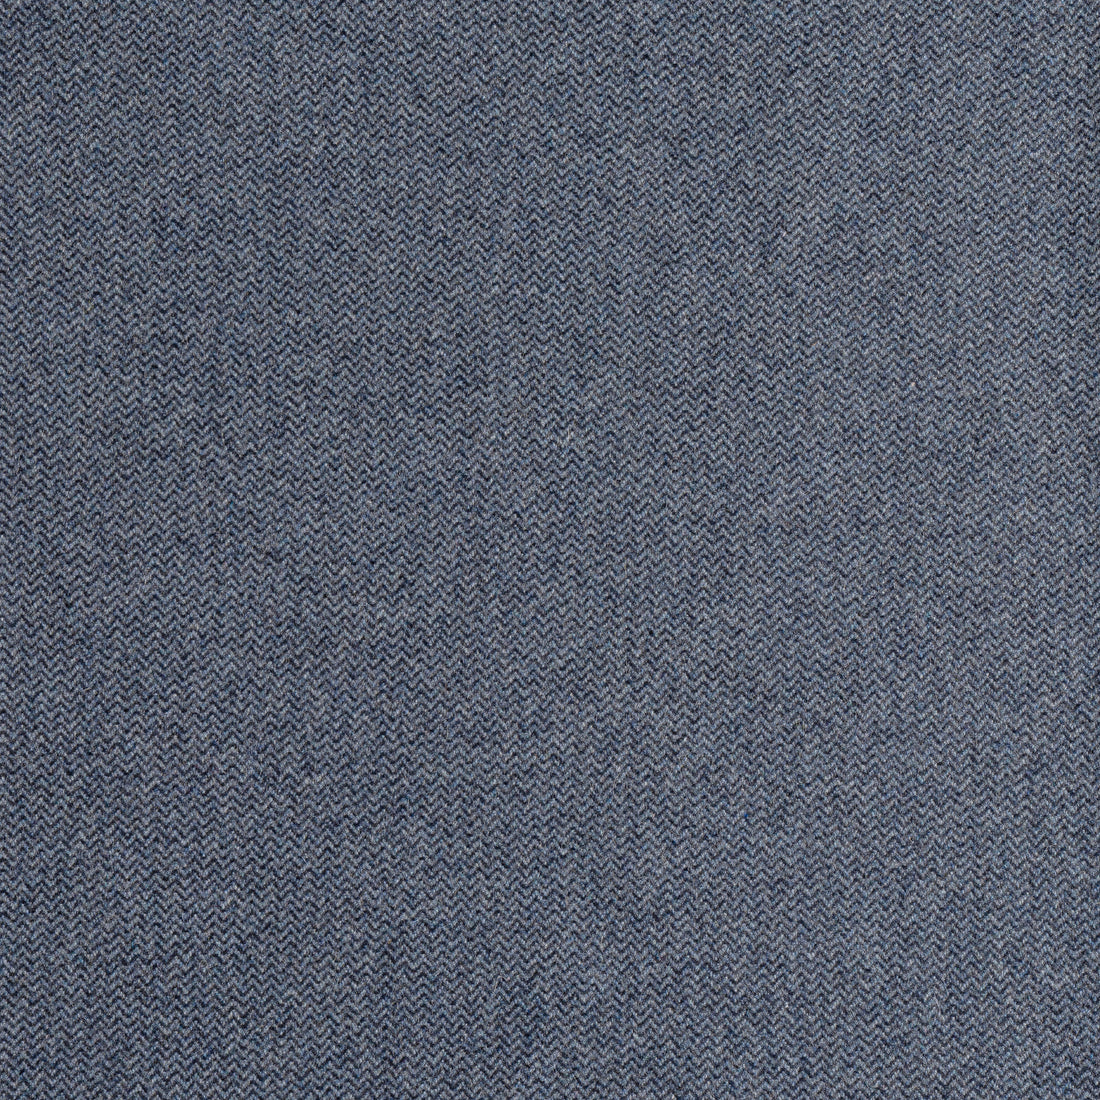 Dorset fabric in navy color - pattern number W80914 - by Thibaut in the Dunmore collection